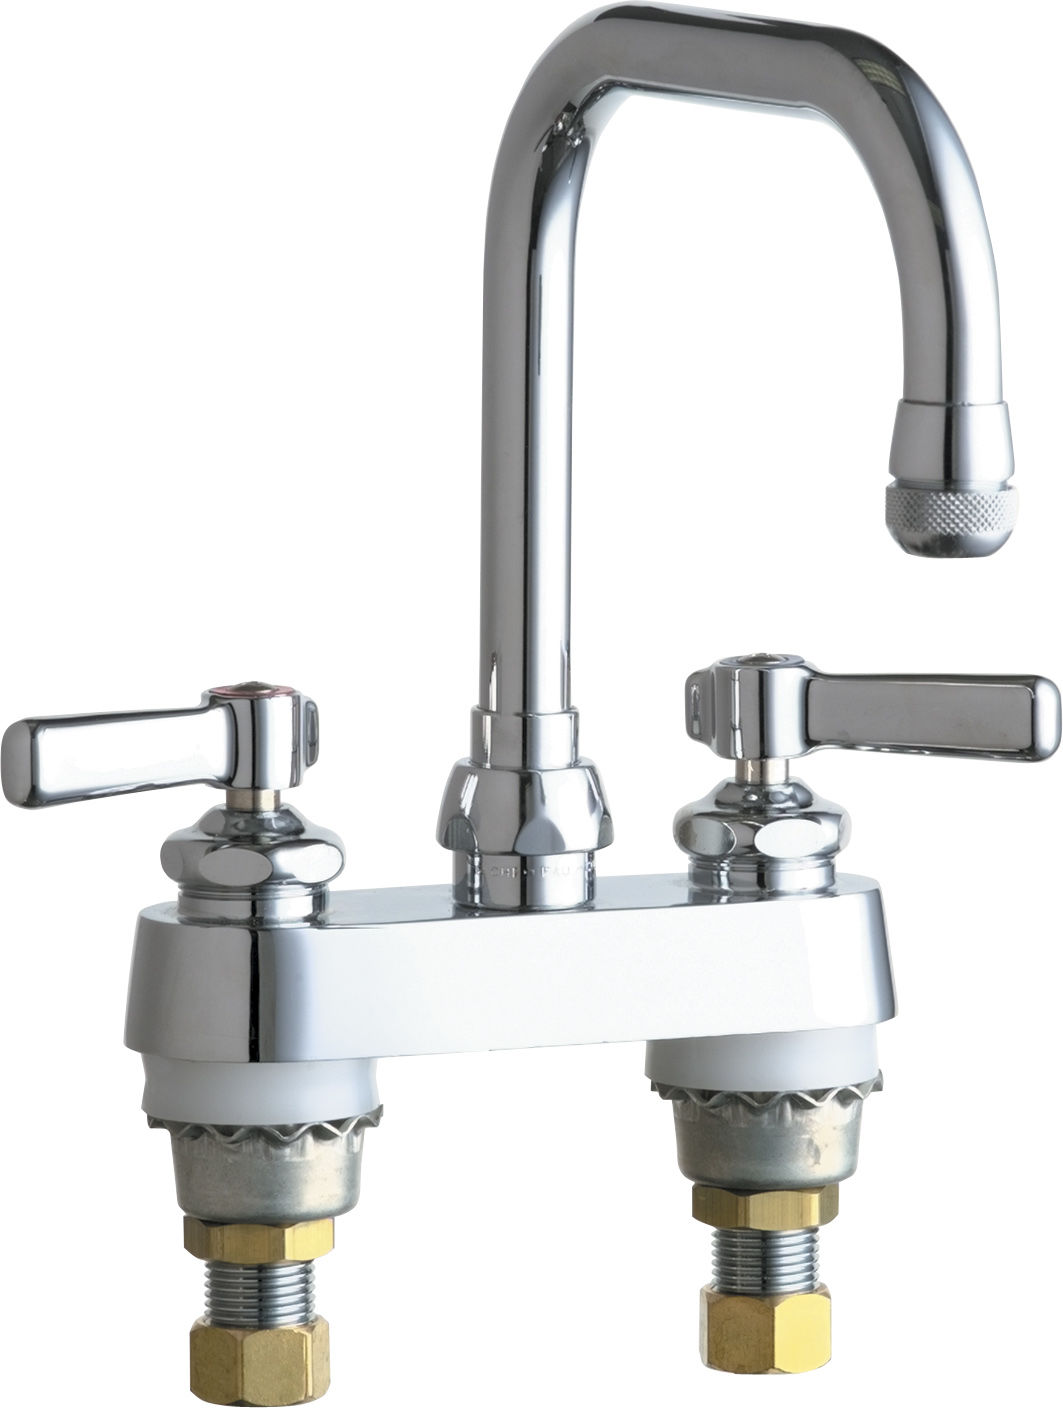 Utility Sink Faucet With Sprayer Vanity 301